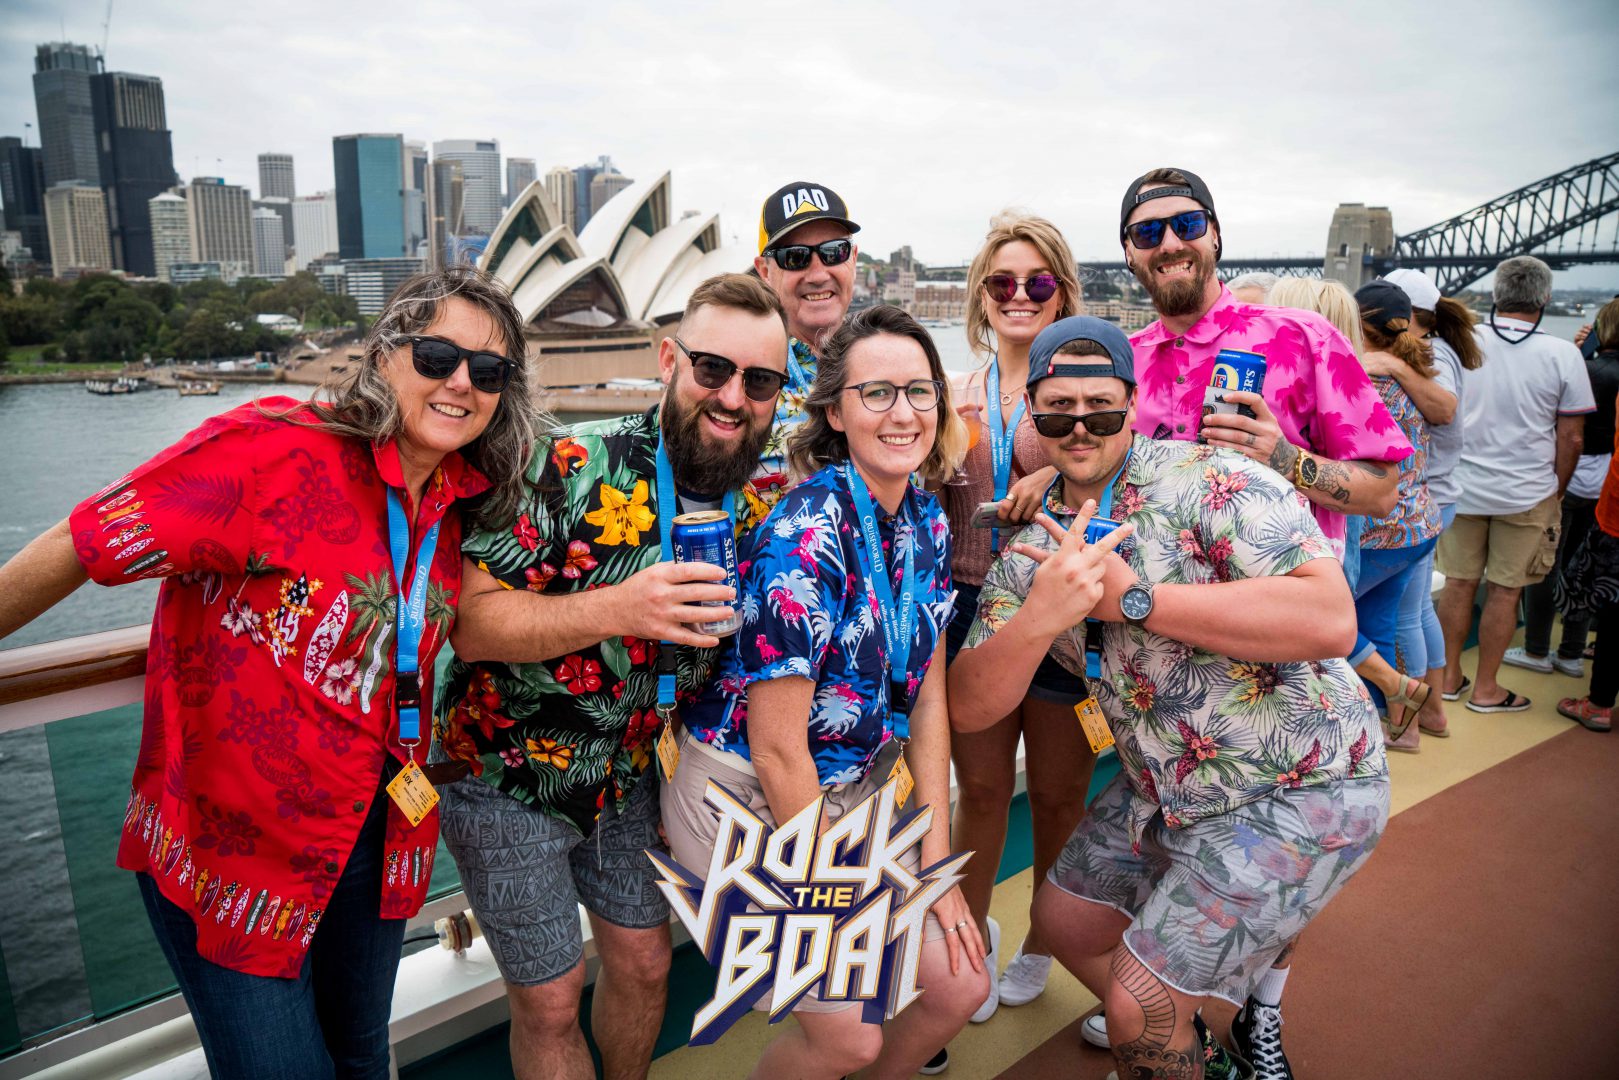 GALLERY: Rock the Boat 2018